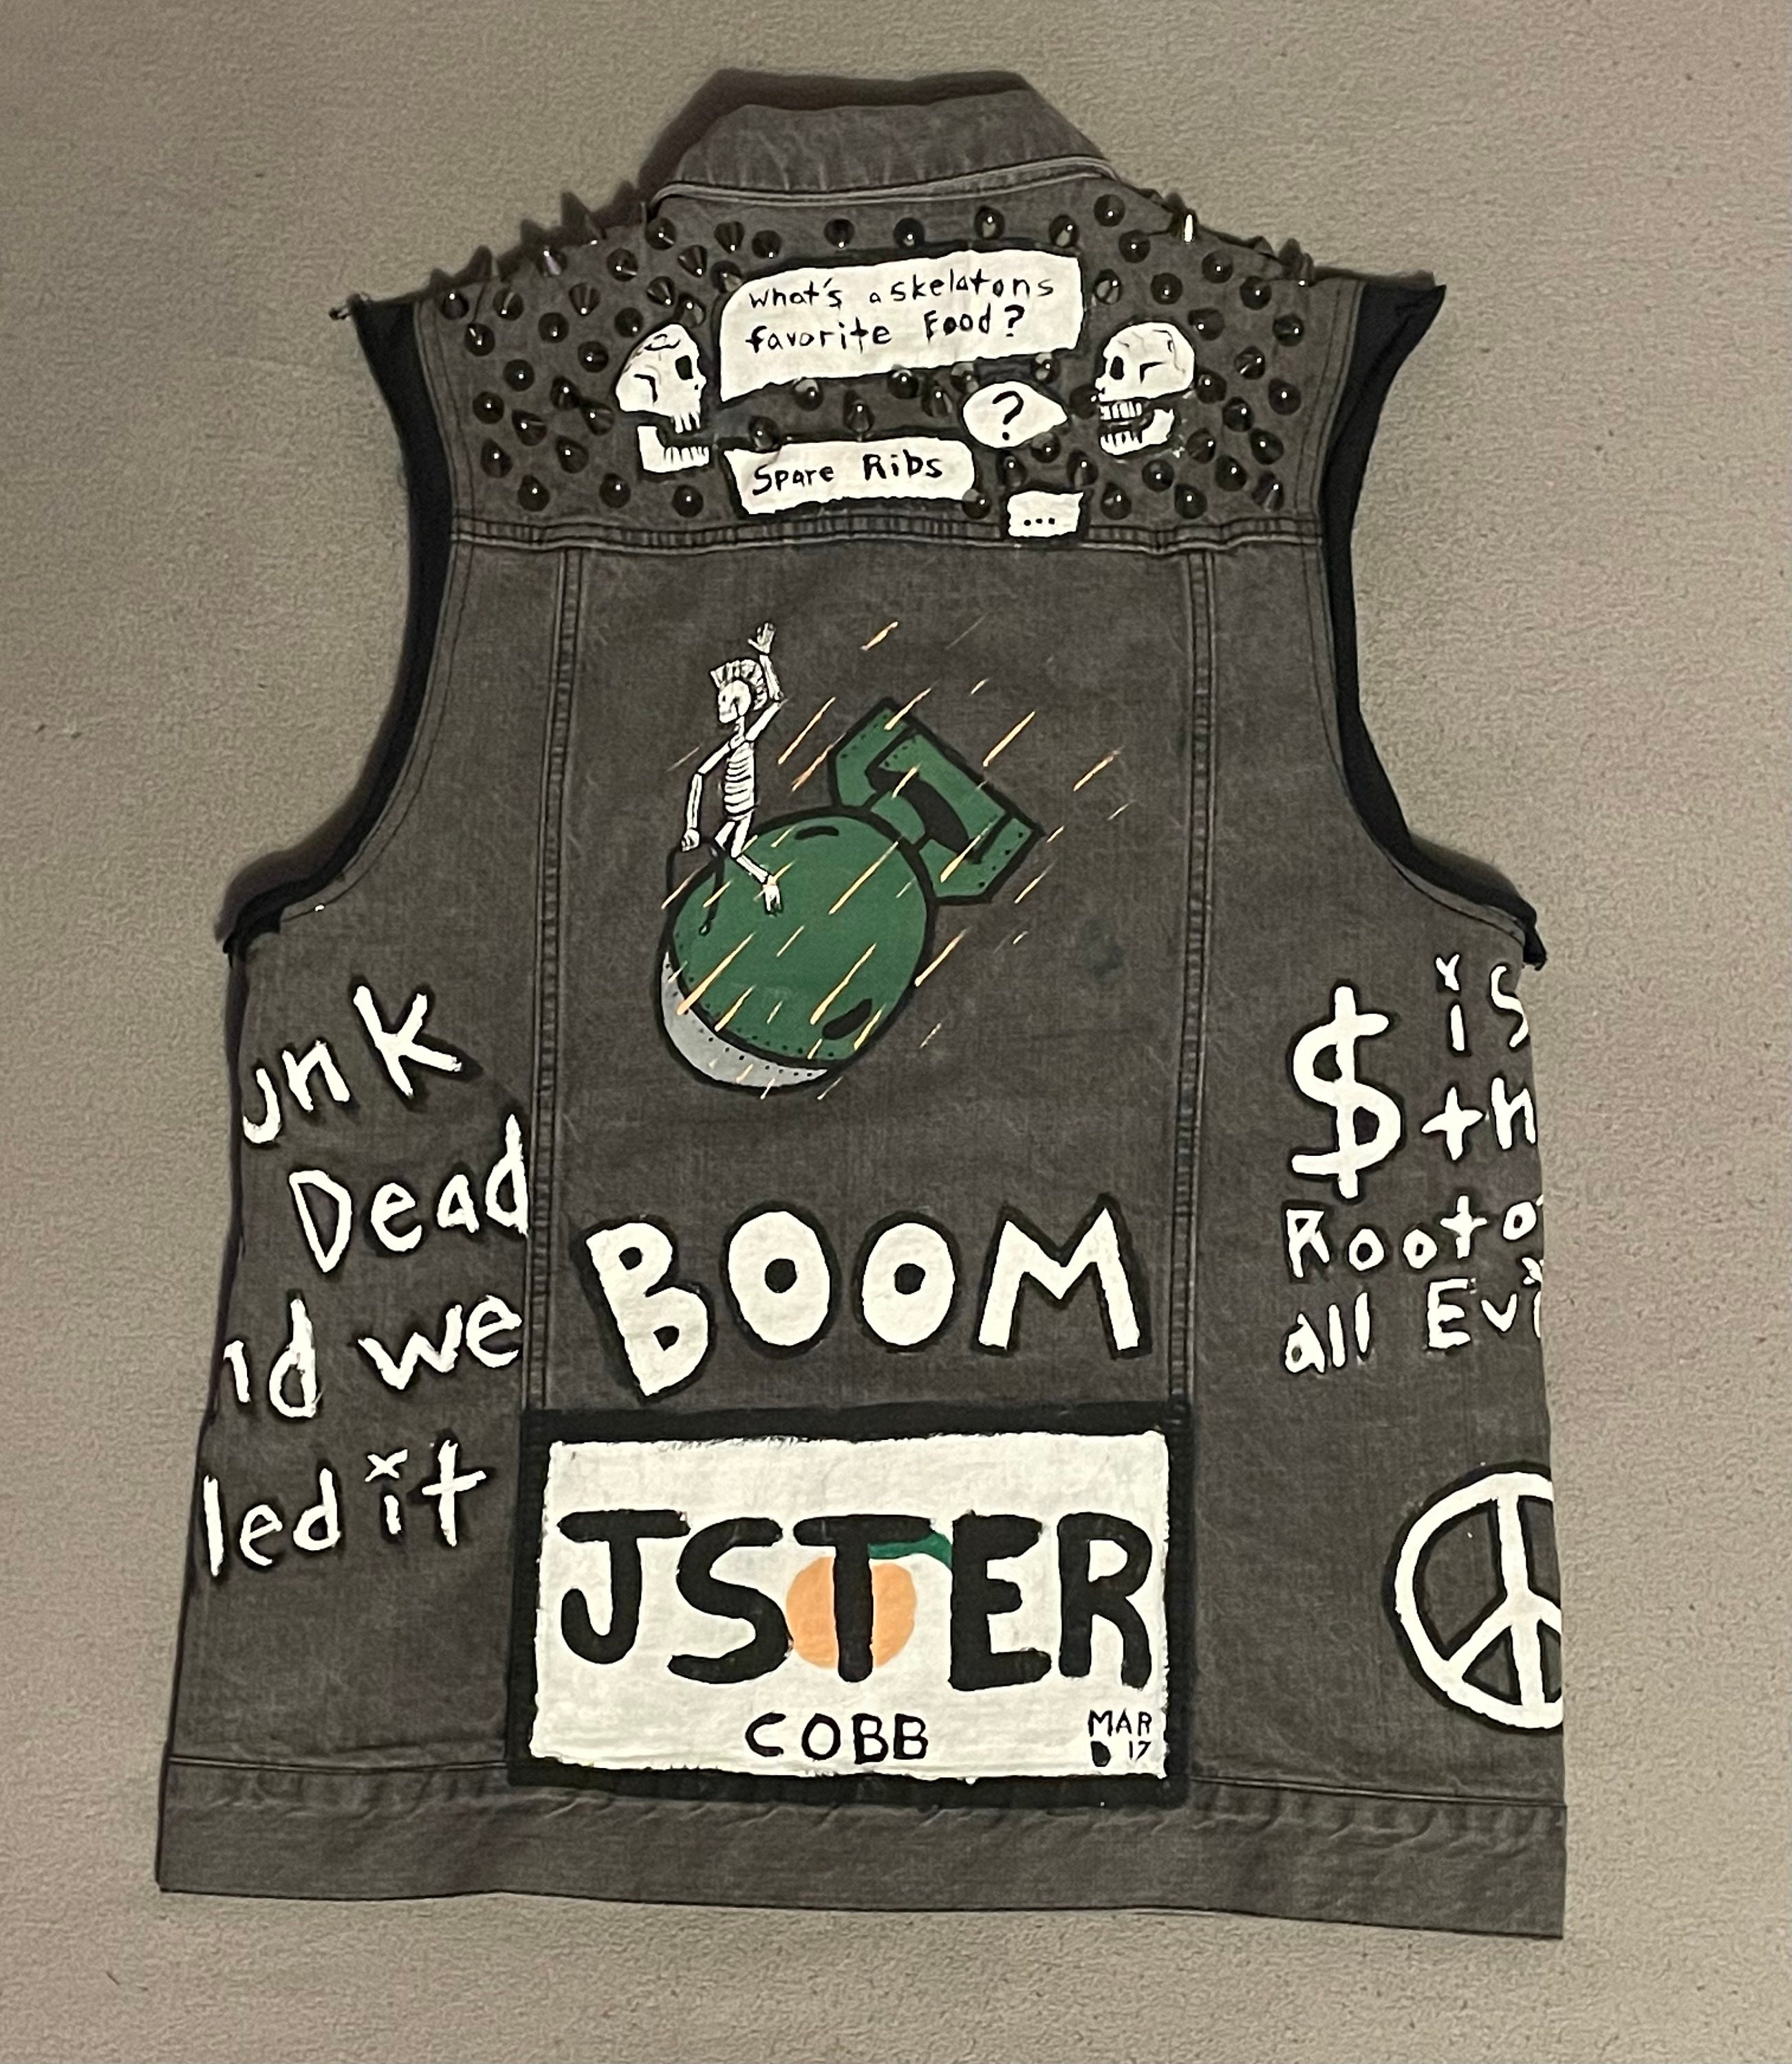 Volbeat battle vest (faded grey with all b&w patches